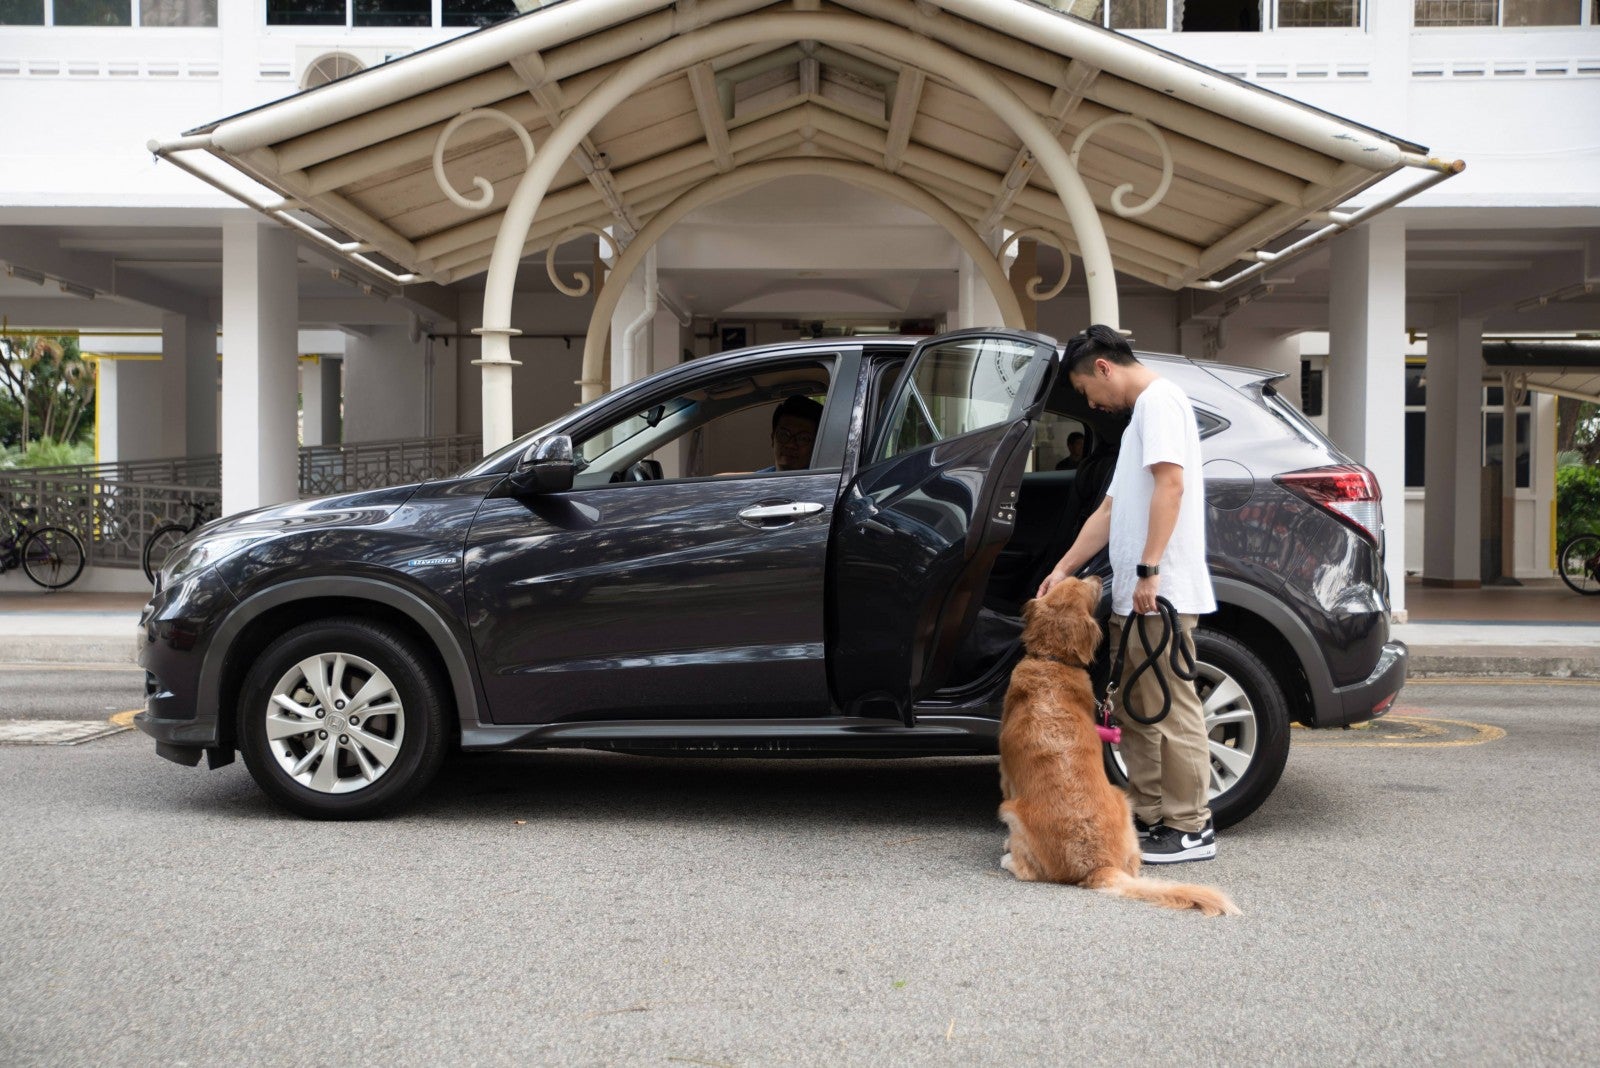 Grab Singapore Now Debuts GrabPet So You Can Travel With Your Four-legged Buddies! - WORLD OF BUZZ 2